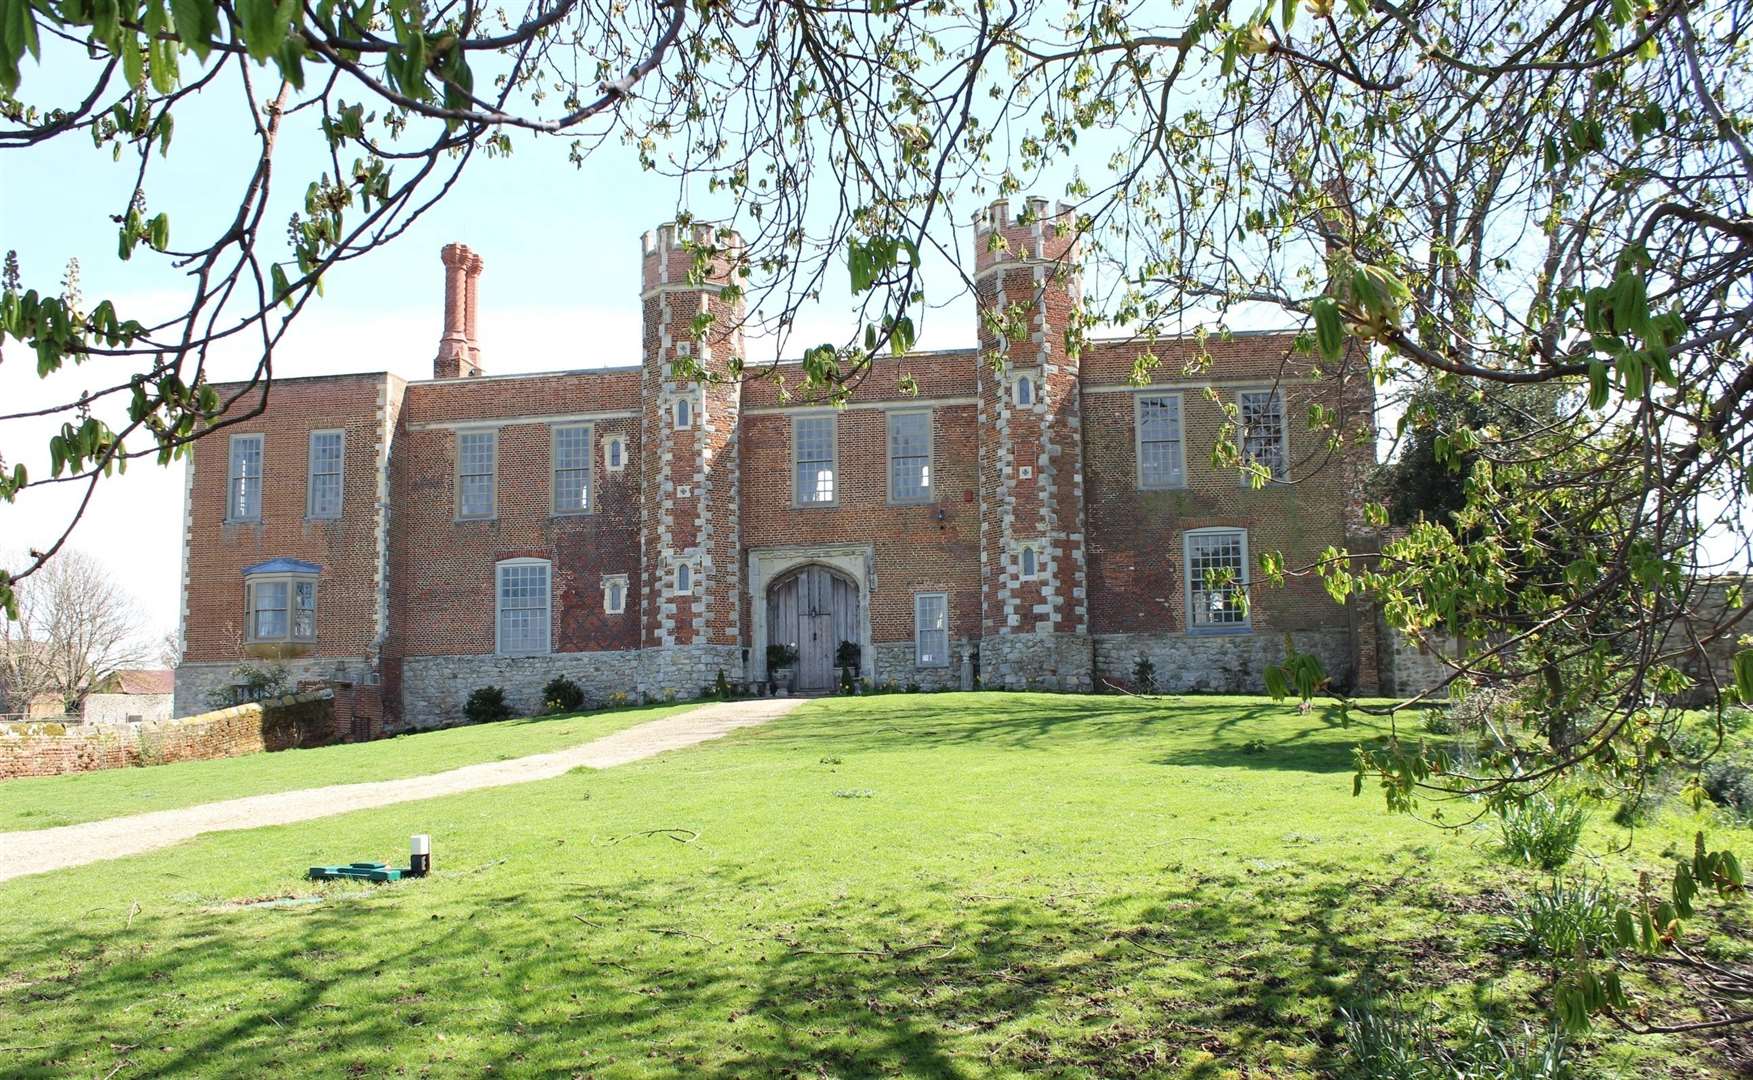 The former Tudor manor Shurland Hall at Eastchurch is on the market for £2.5 million. Picture: John Nurden (5377538)